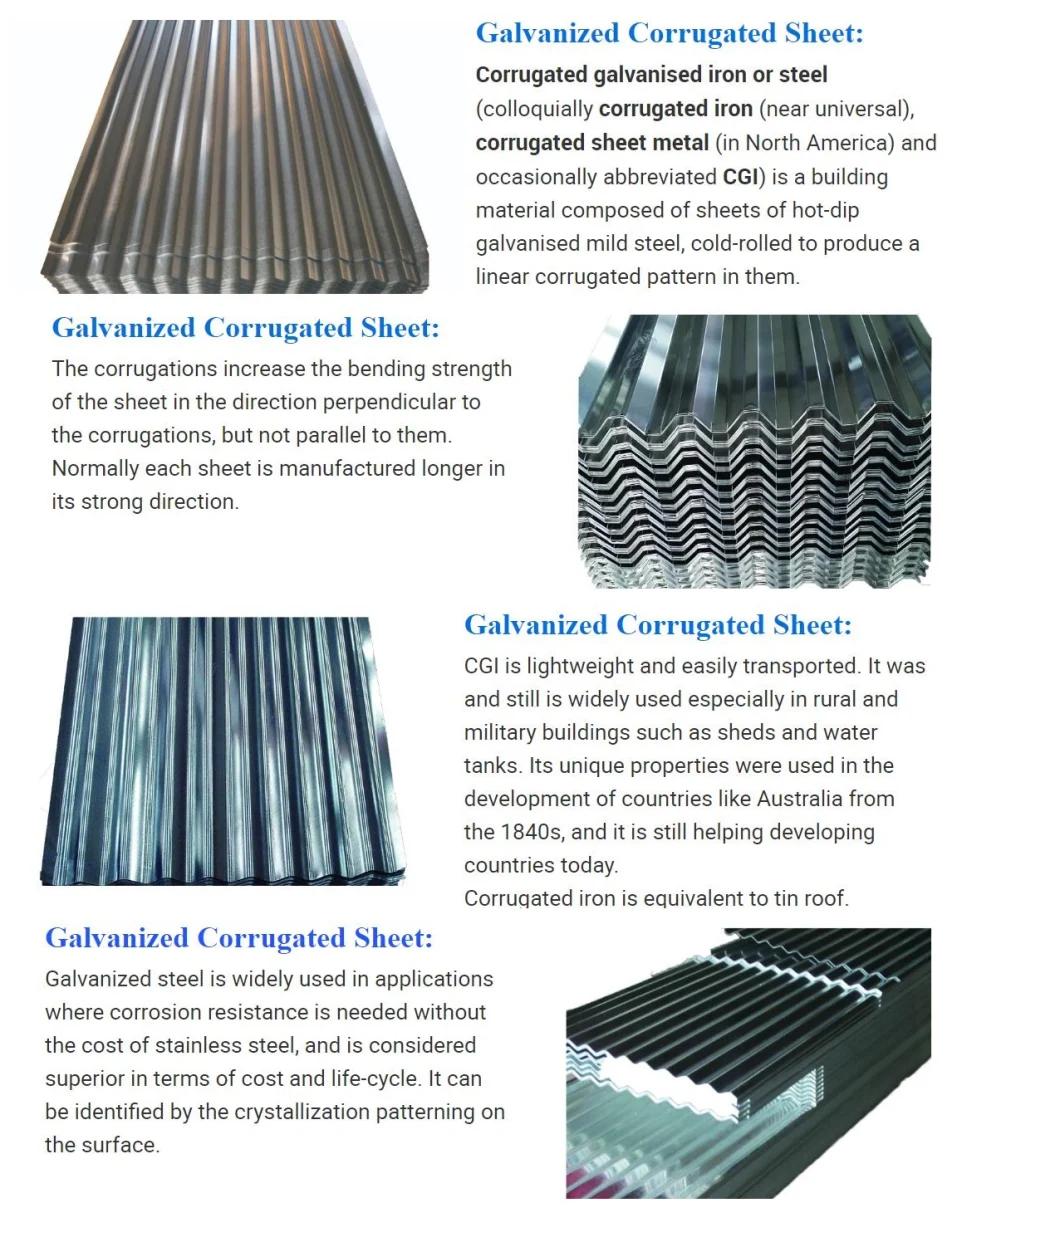 Best Price Gi/Galvanized Corrugated Steel Roofing Sheet for Construction